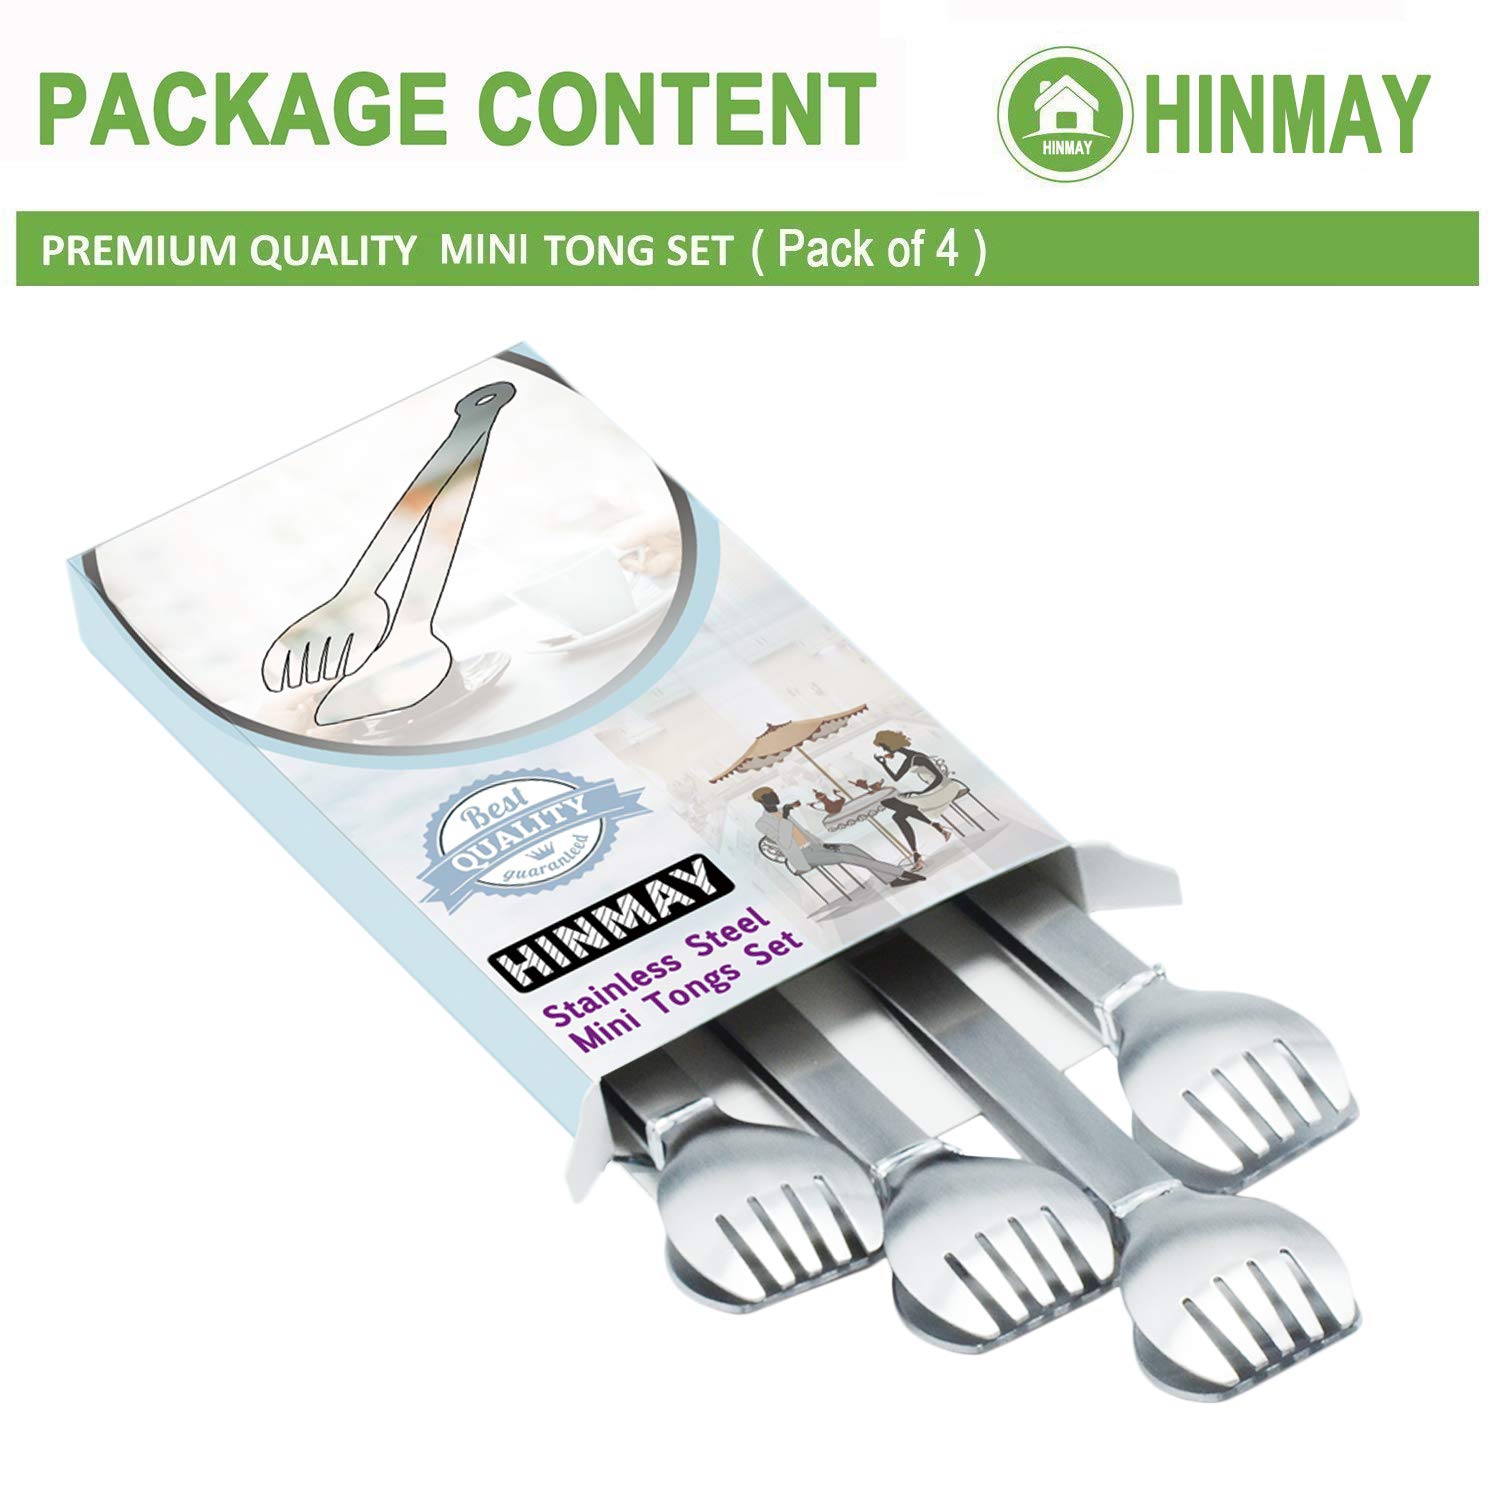 HINMAY Small Serving Tongs 6-Inch Stainless Steel Mini Appetizer Tongs, Set of 4 (Brushed)